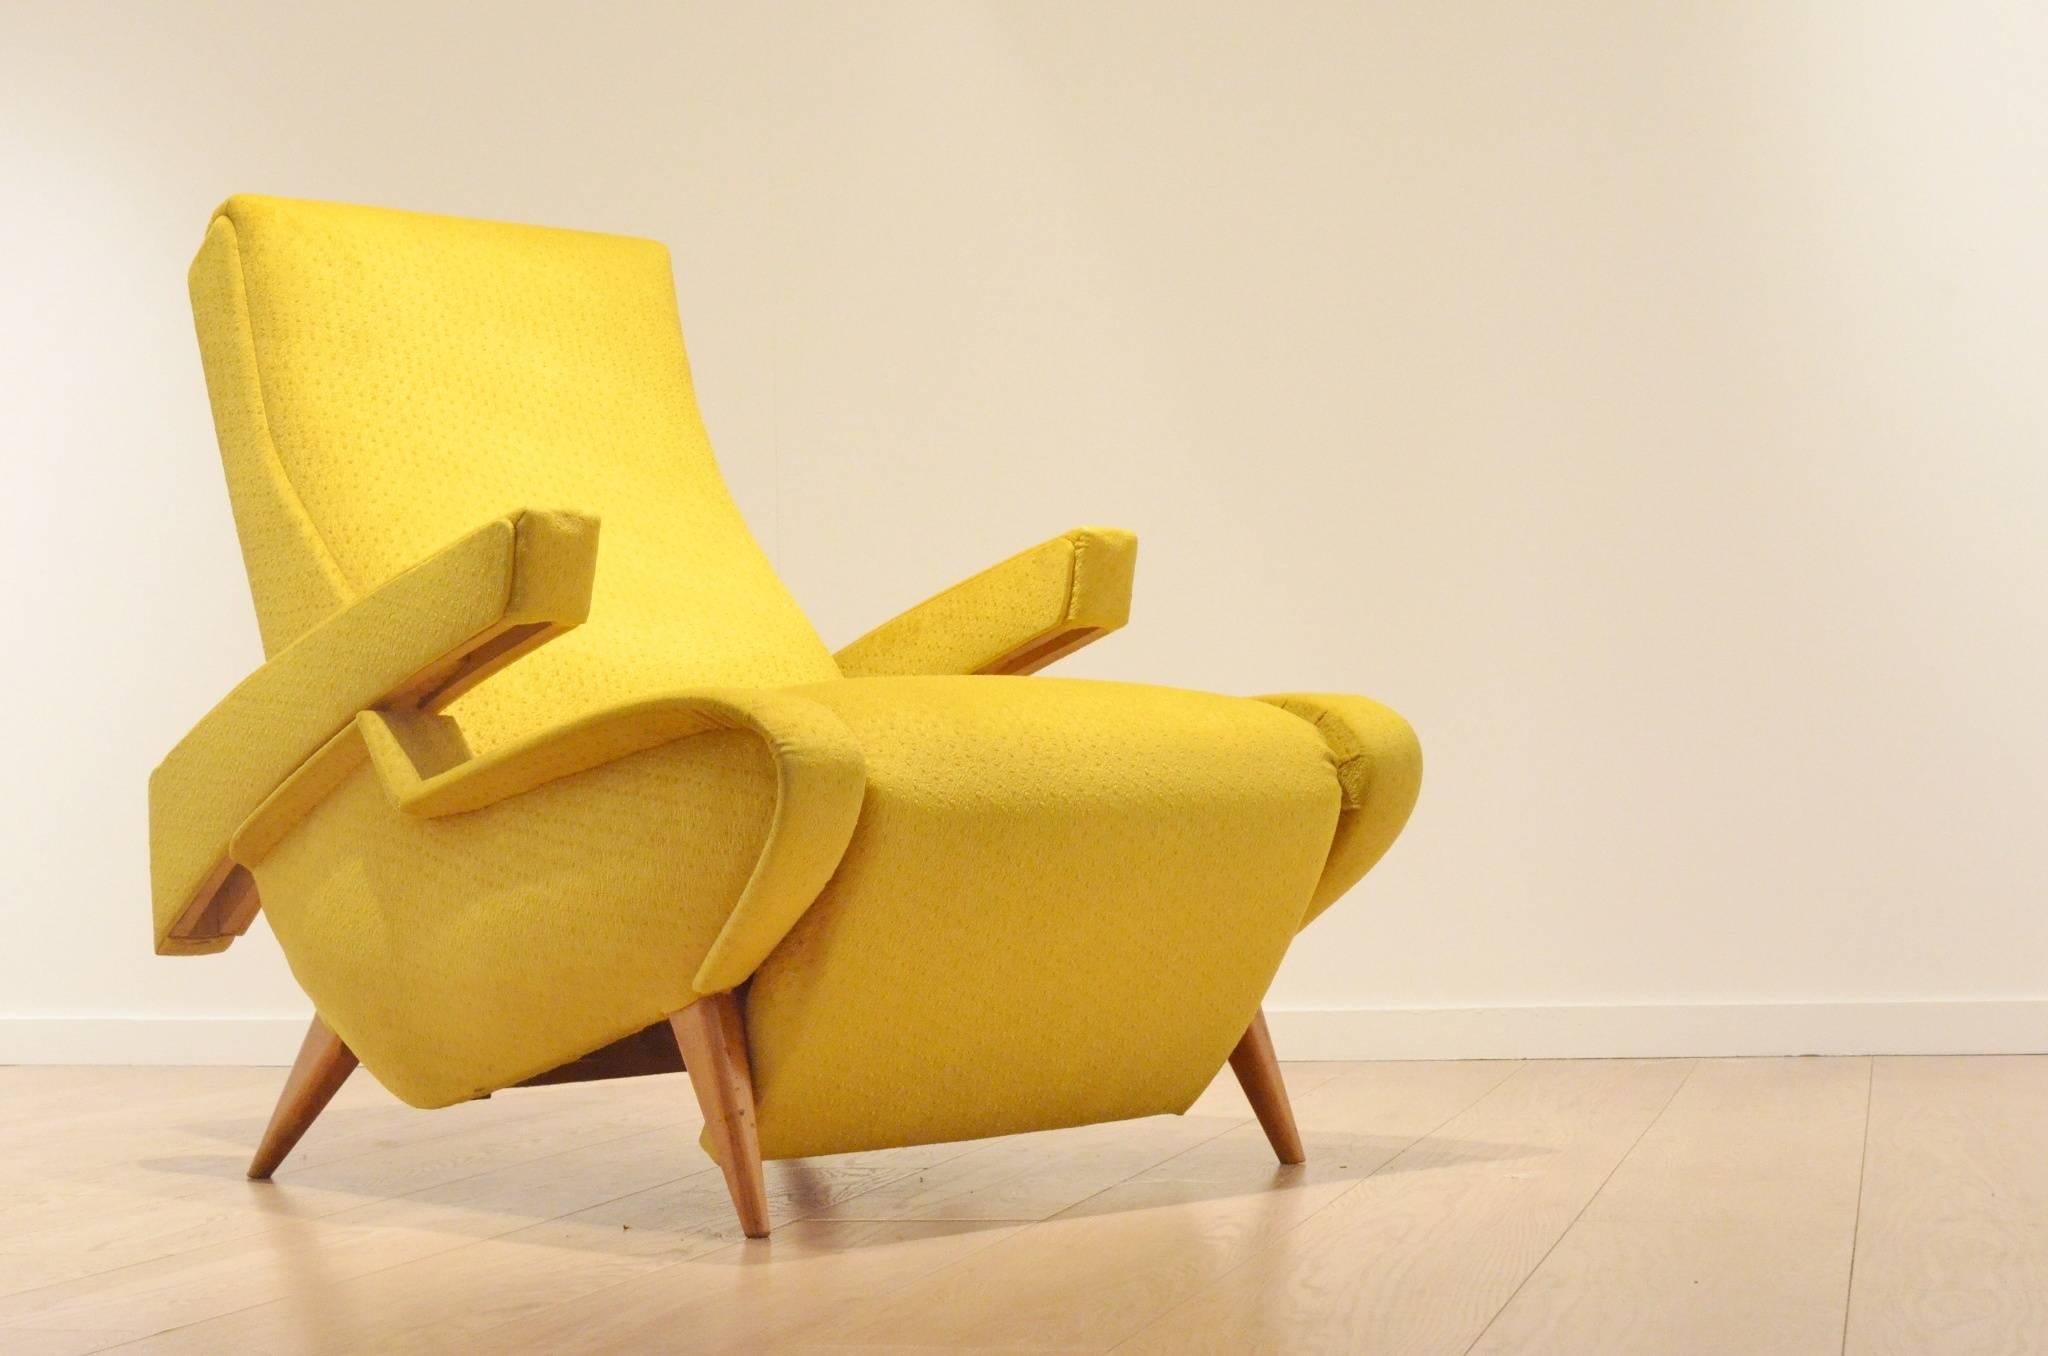 Unique Italian mustard yellow easy chair in the manner of Augusto Romano, and dating from the end 1940s. It converts into a daybed as well as adjustable arm rests. Very futuristic and streamline design with sculpted wooden legs. 
The textile of the